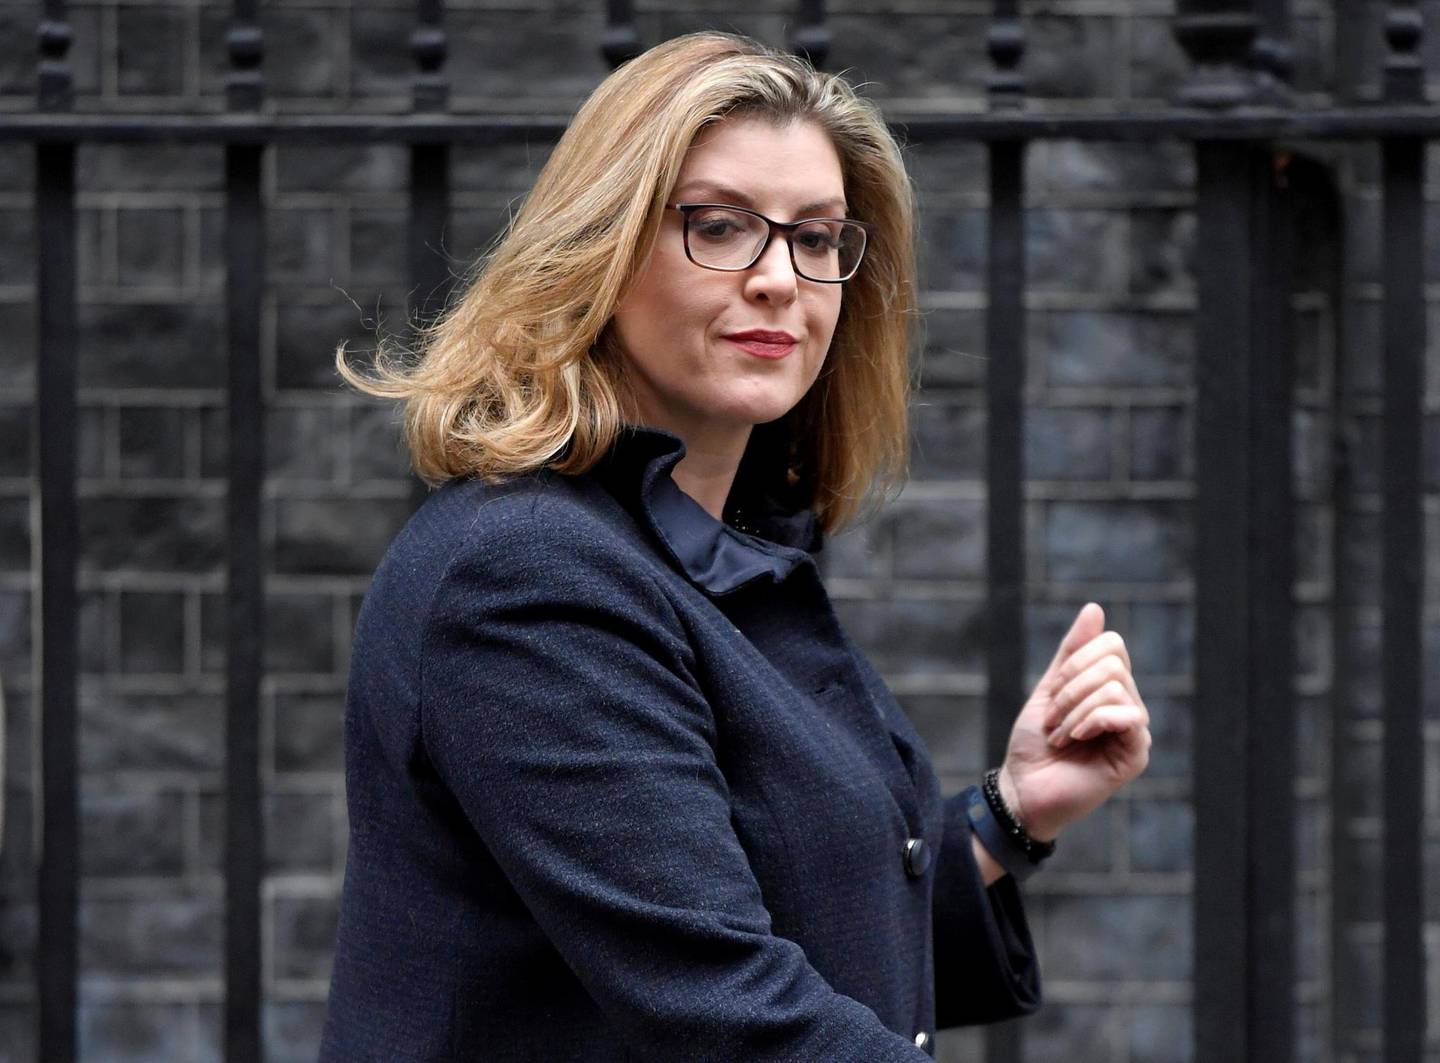 FILE PHOTO: Britain's Secretary of State for International Development Penny Mordaunt is seen outside of Downing Street in London, Britain, February 5, 2019. REUTERS/Toby Melville/File Photo